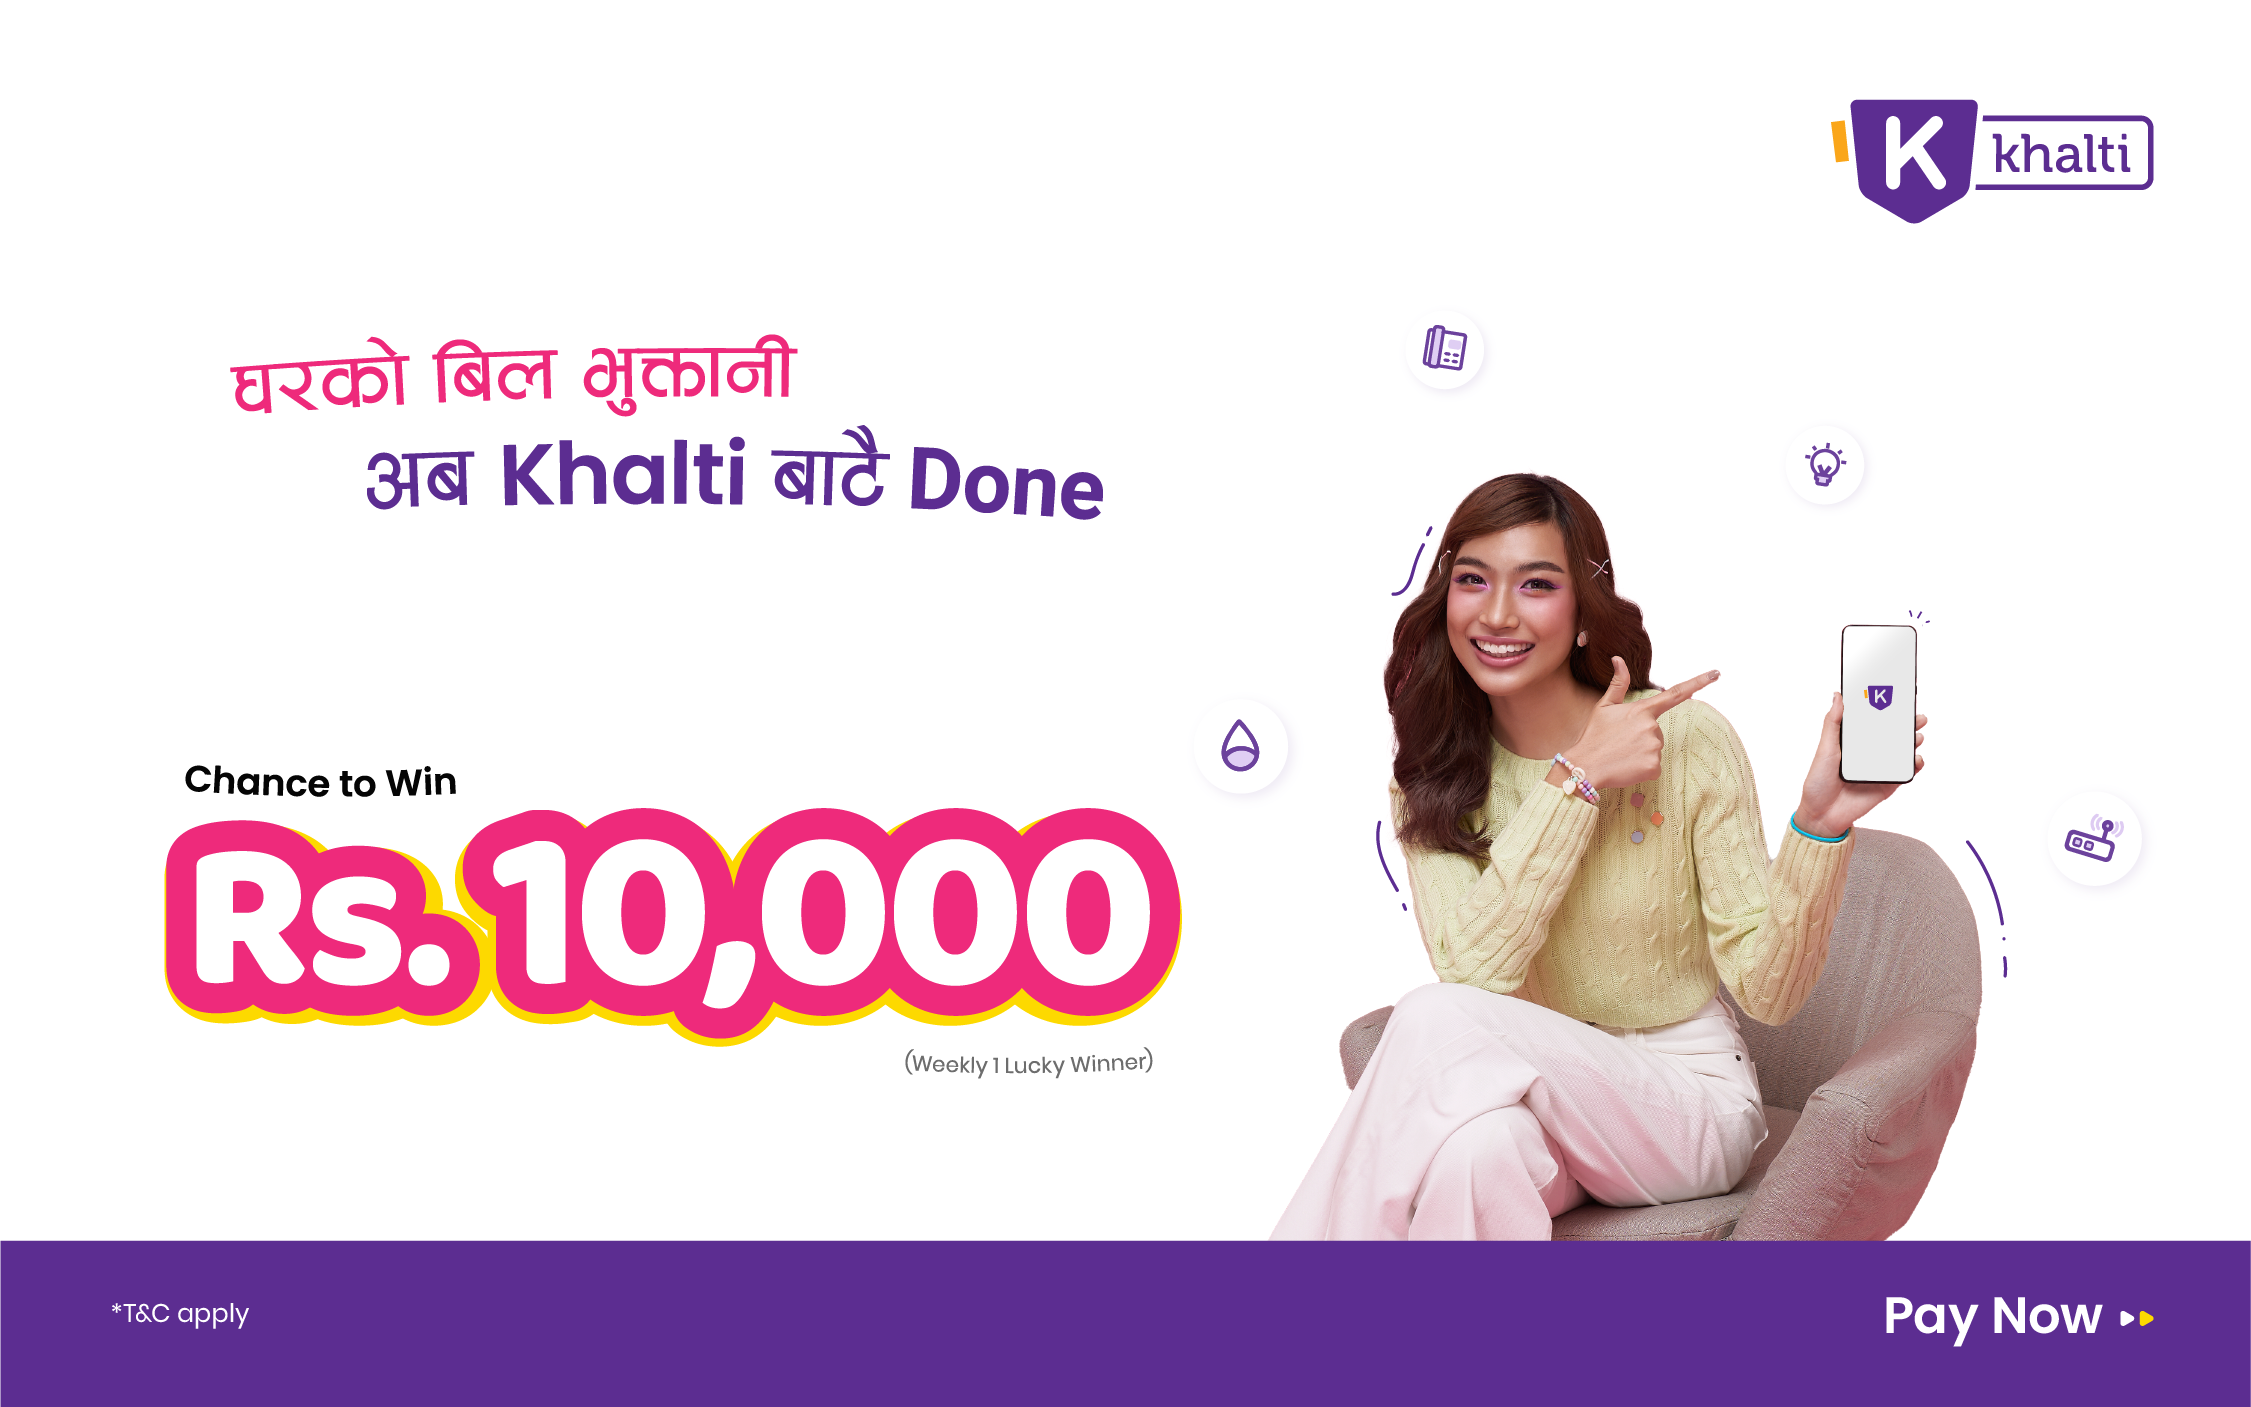 Pay utility bills from Khalti and win whopping 10,000